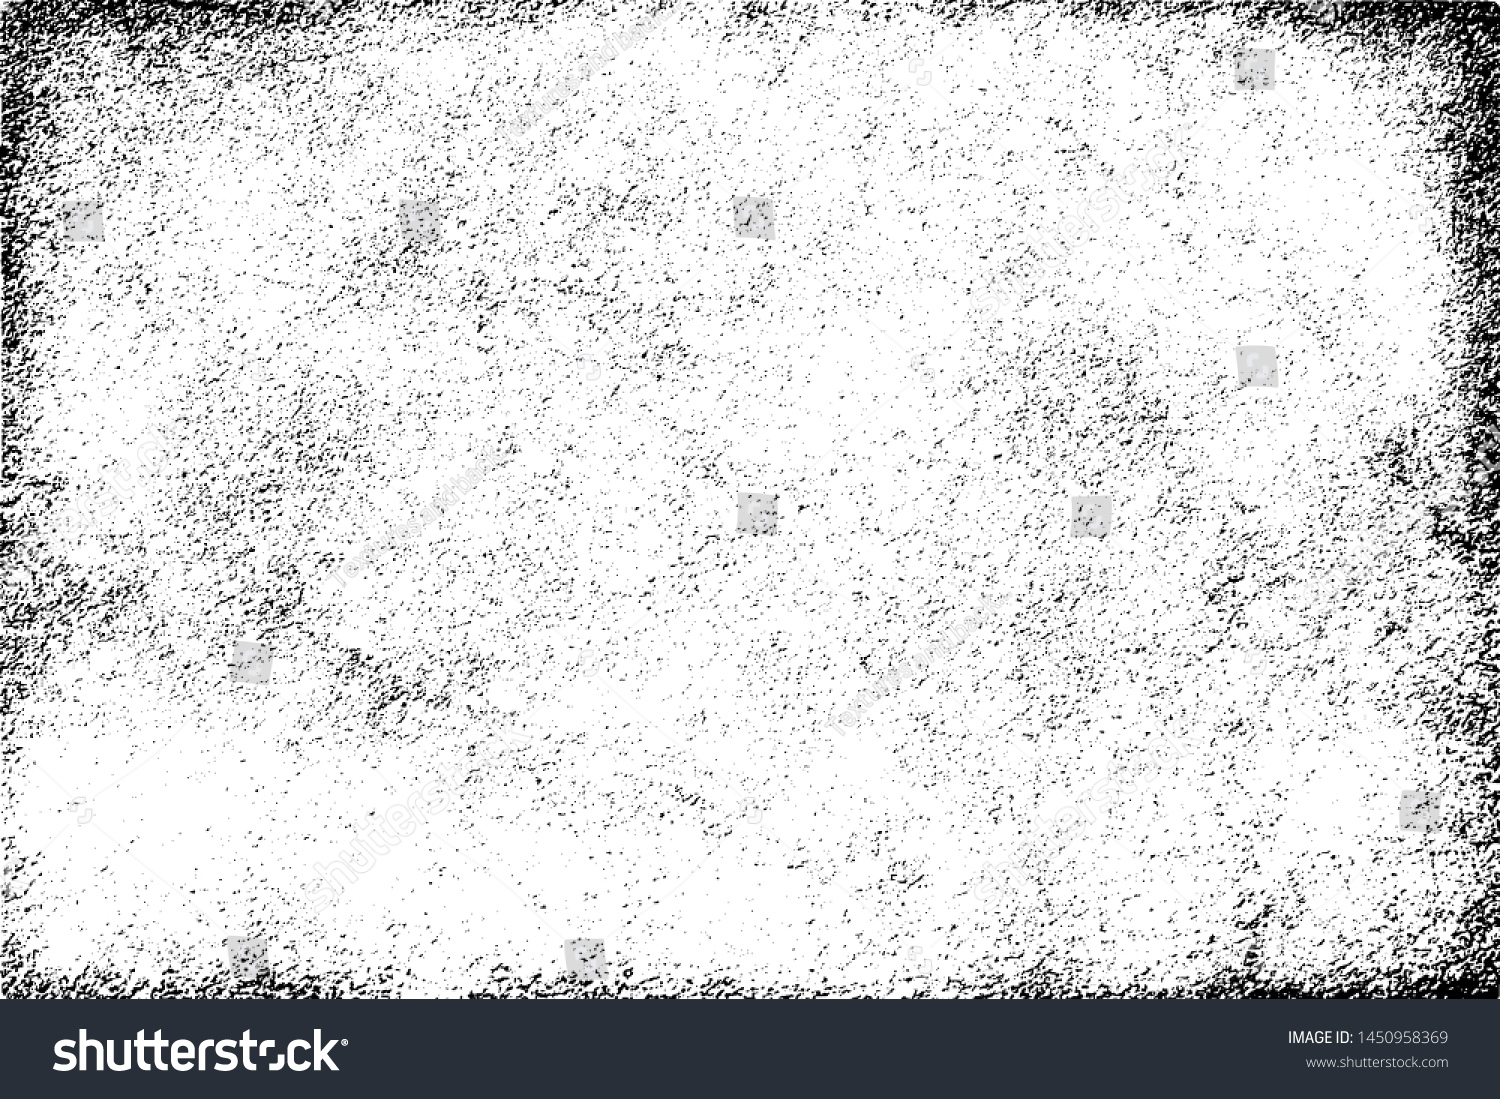 Grunge background black white abstract #1450958369